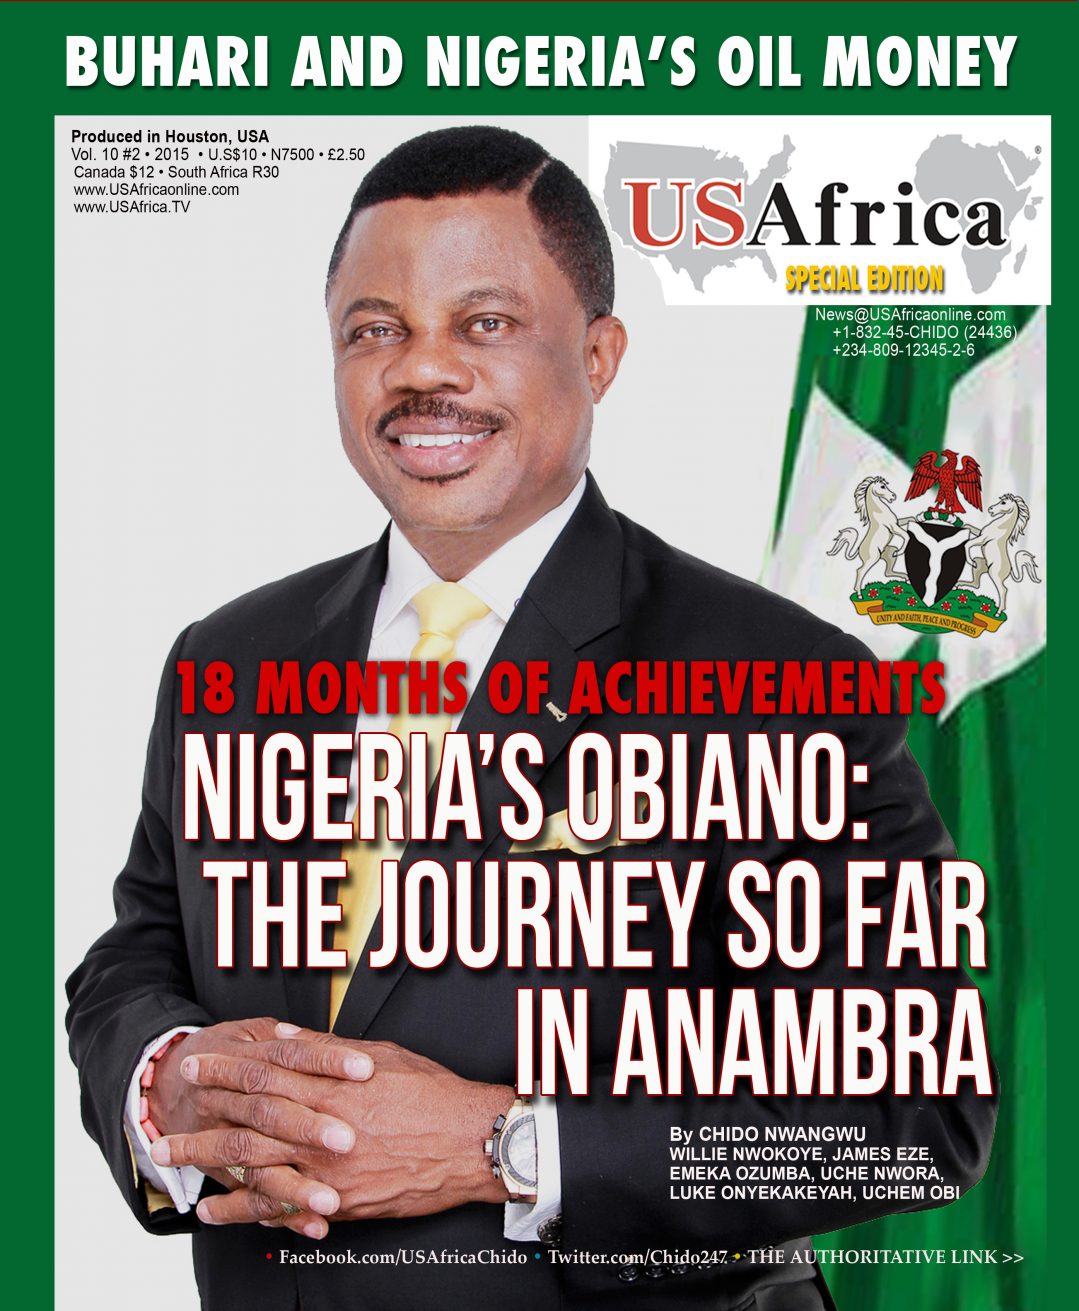 USAfrica: 10 reasons why Obiano's popularity is sky high